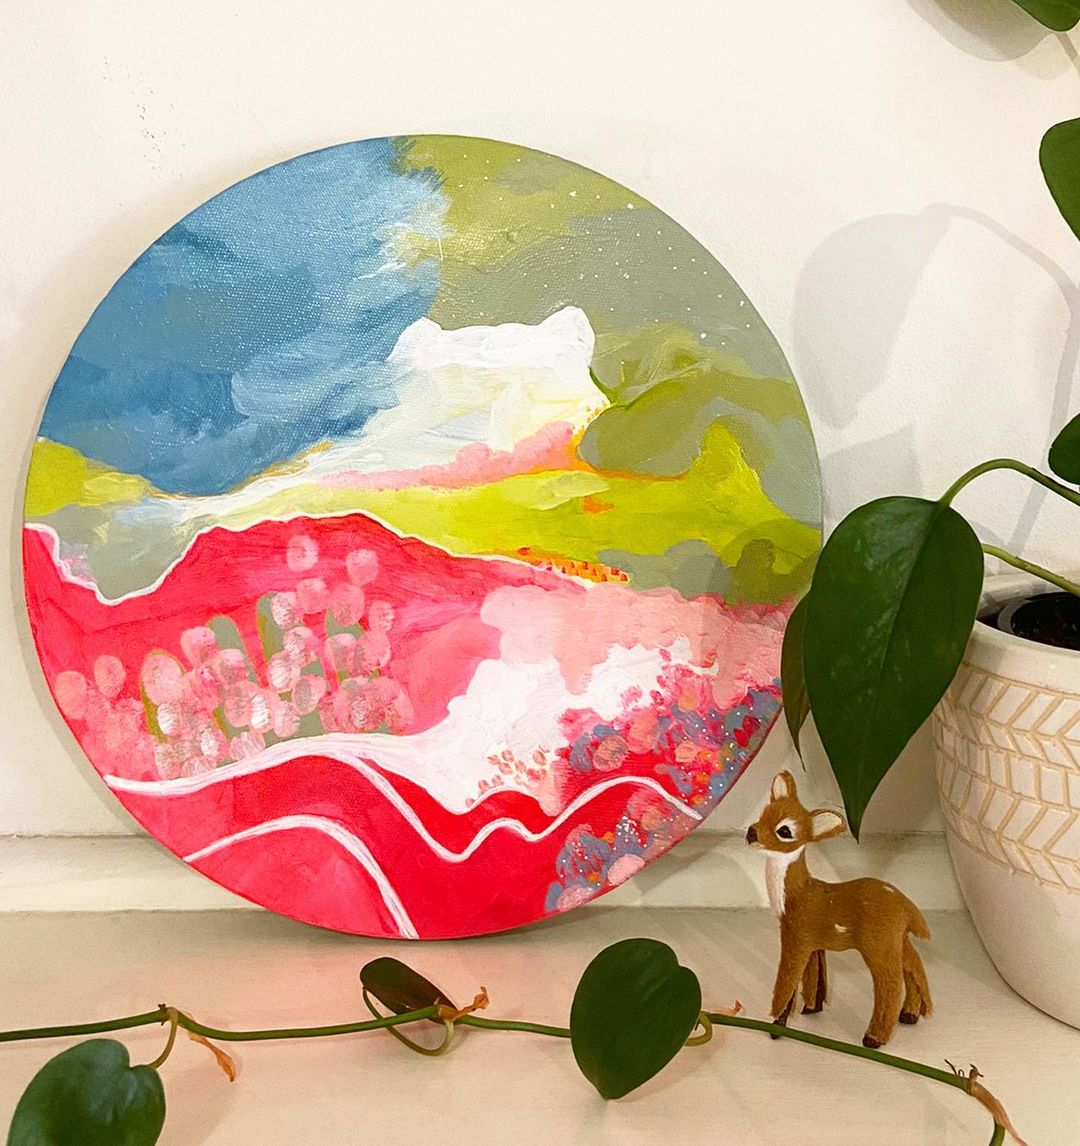 Tessa's artwork 'abstract porthole #6' on a circular canvas next to a small plastic deer and plant leaves near by.